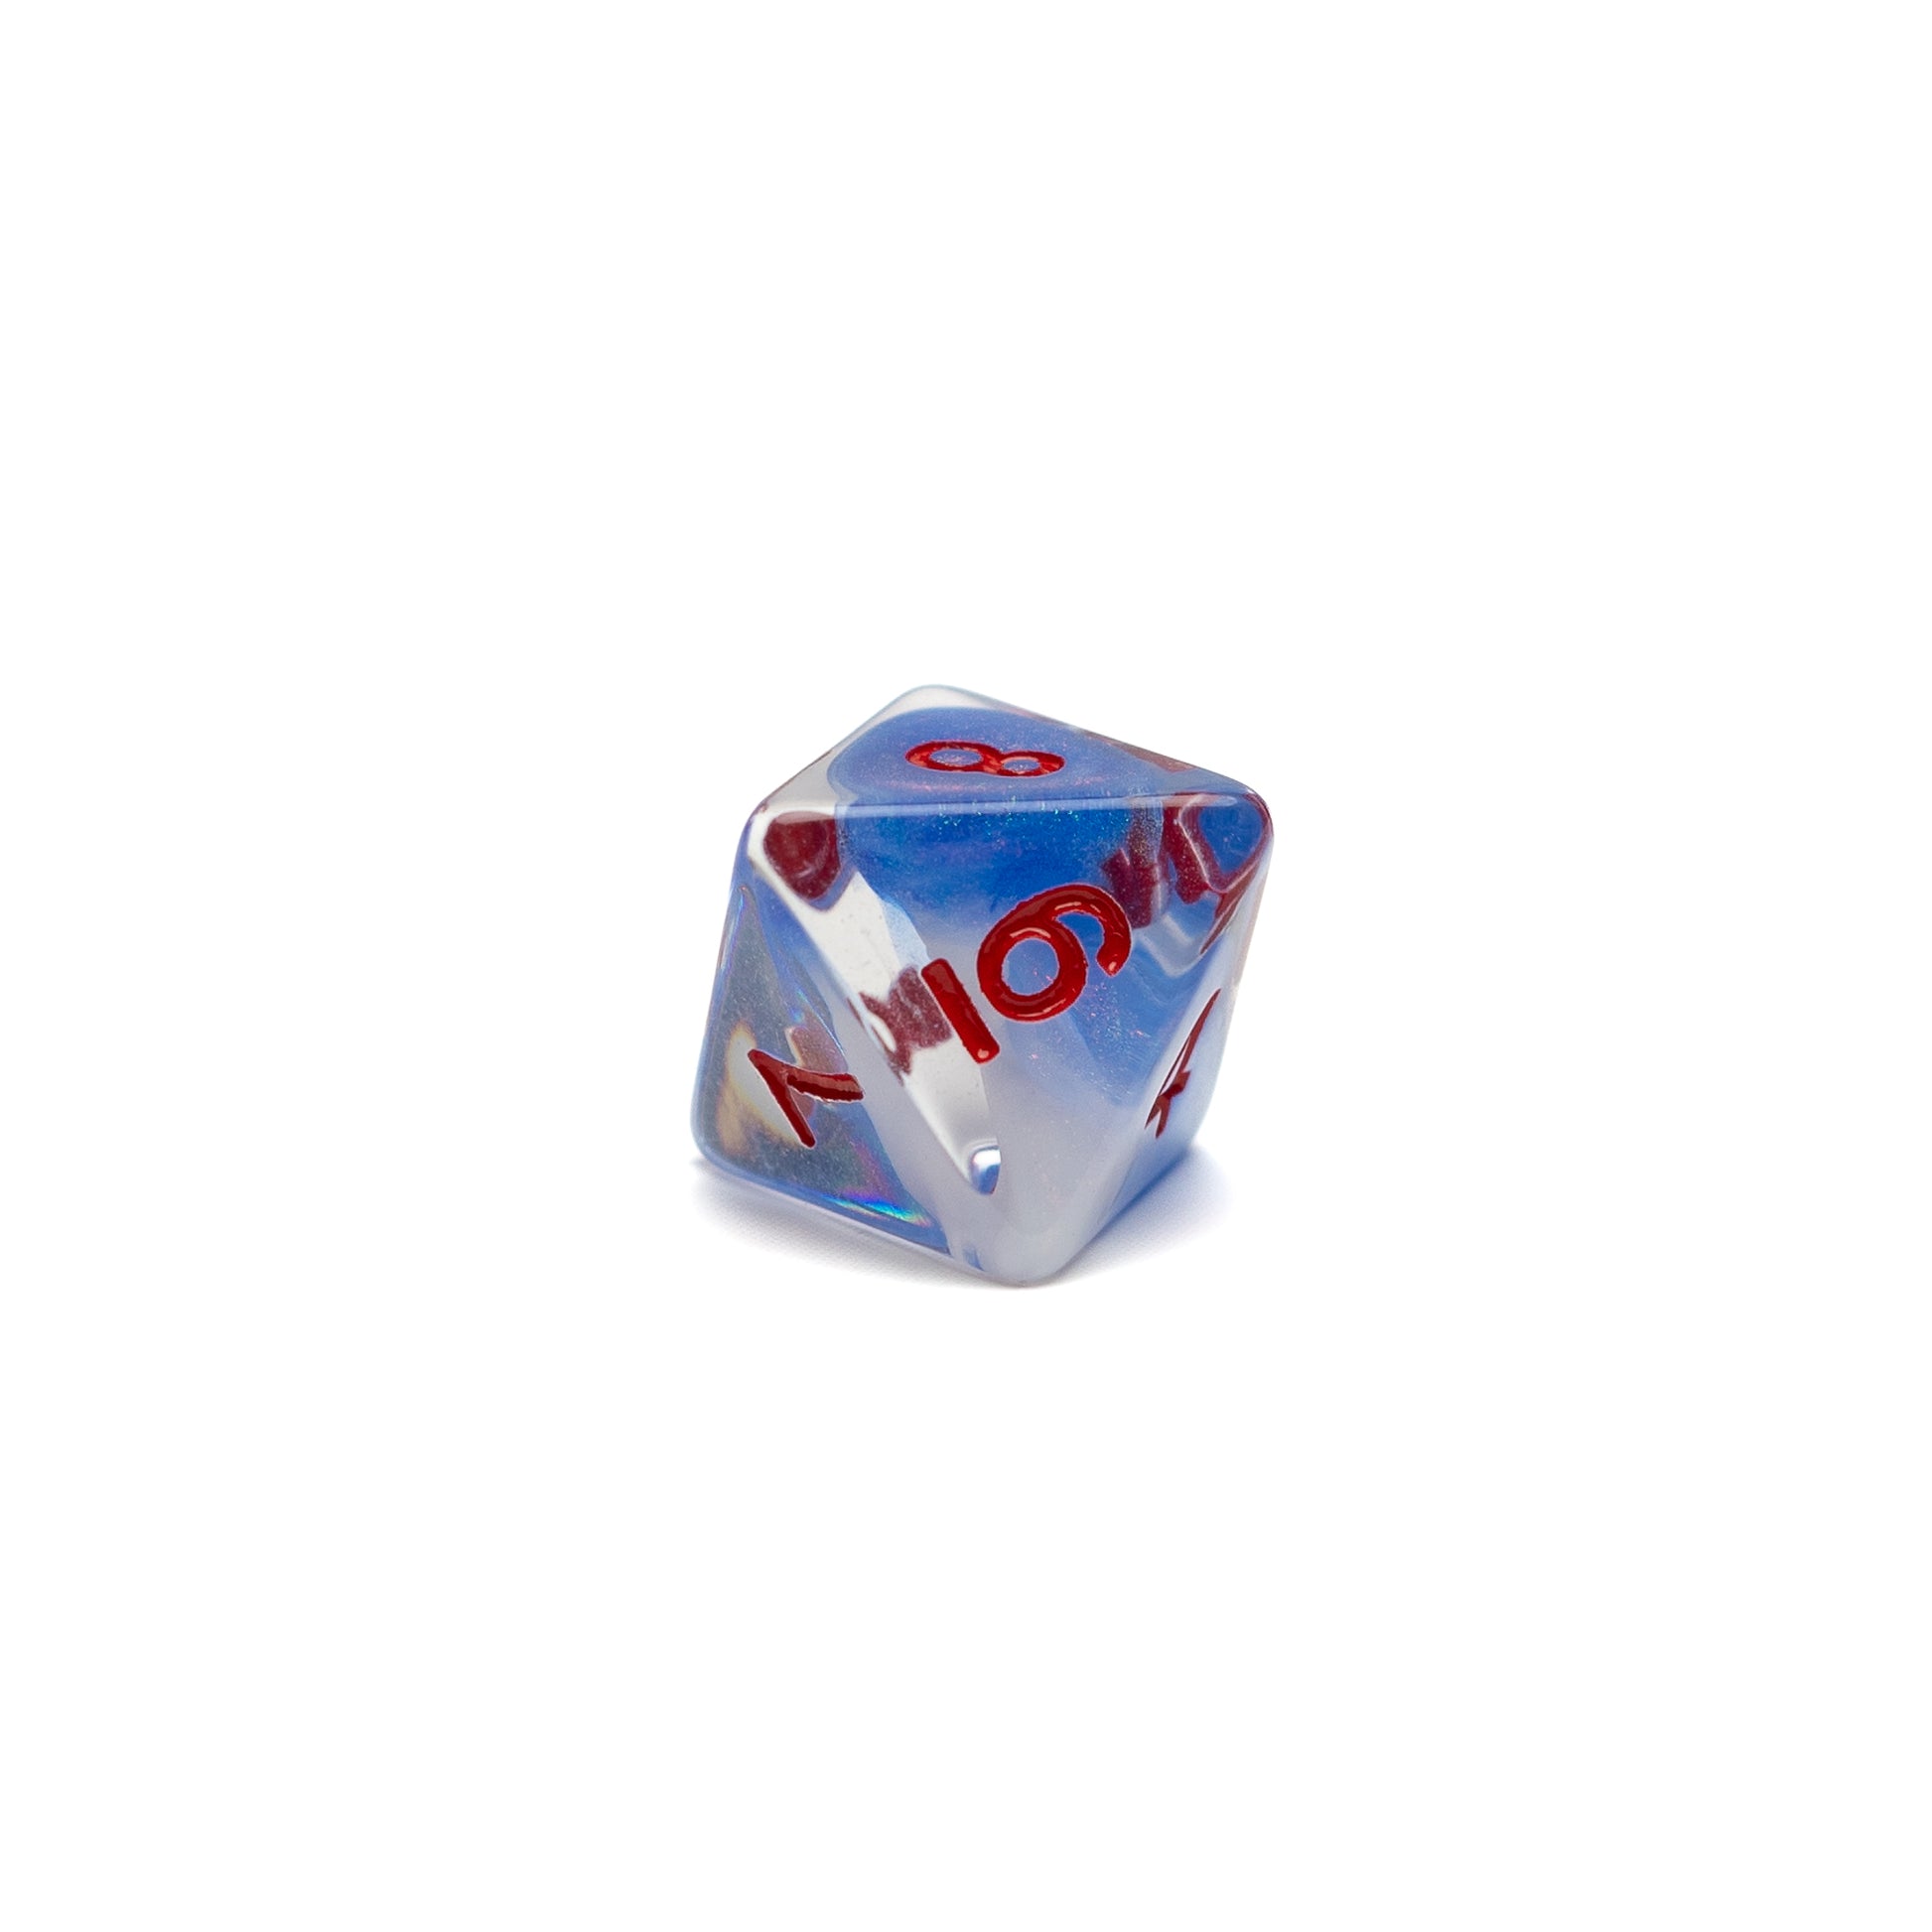 Roll Britannia Acrylic Dungeons and Dragons D8 Dice with Red and Blue Ocean Aesthetic